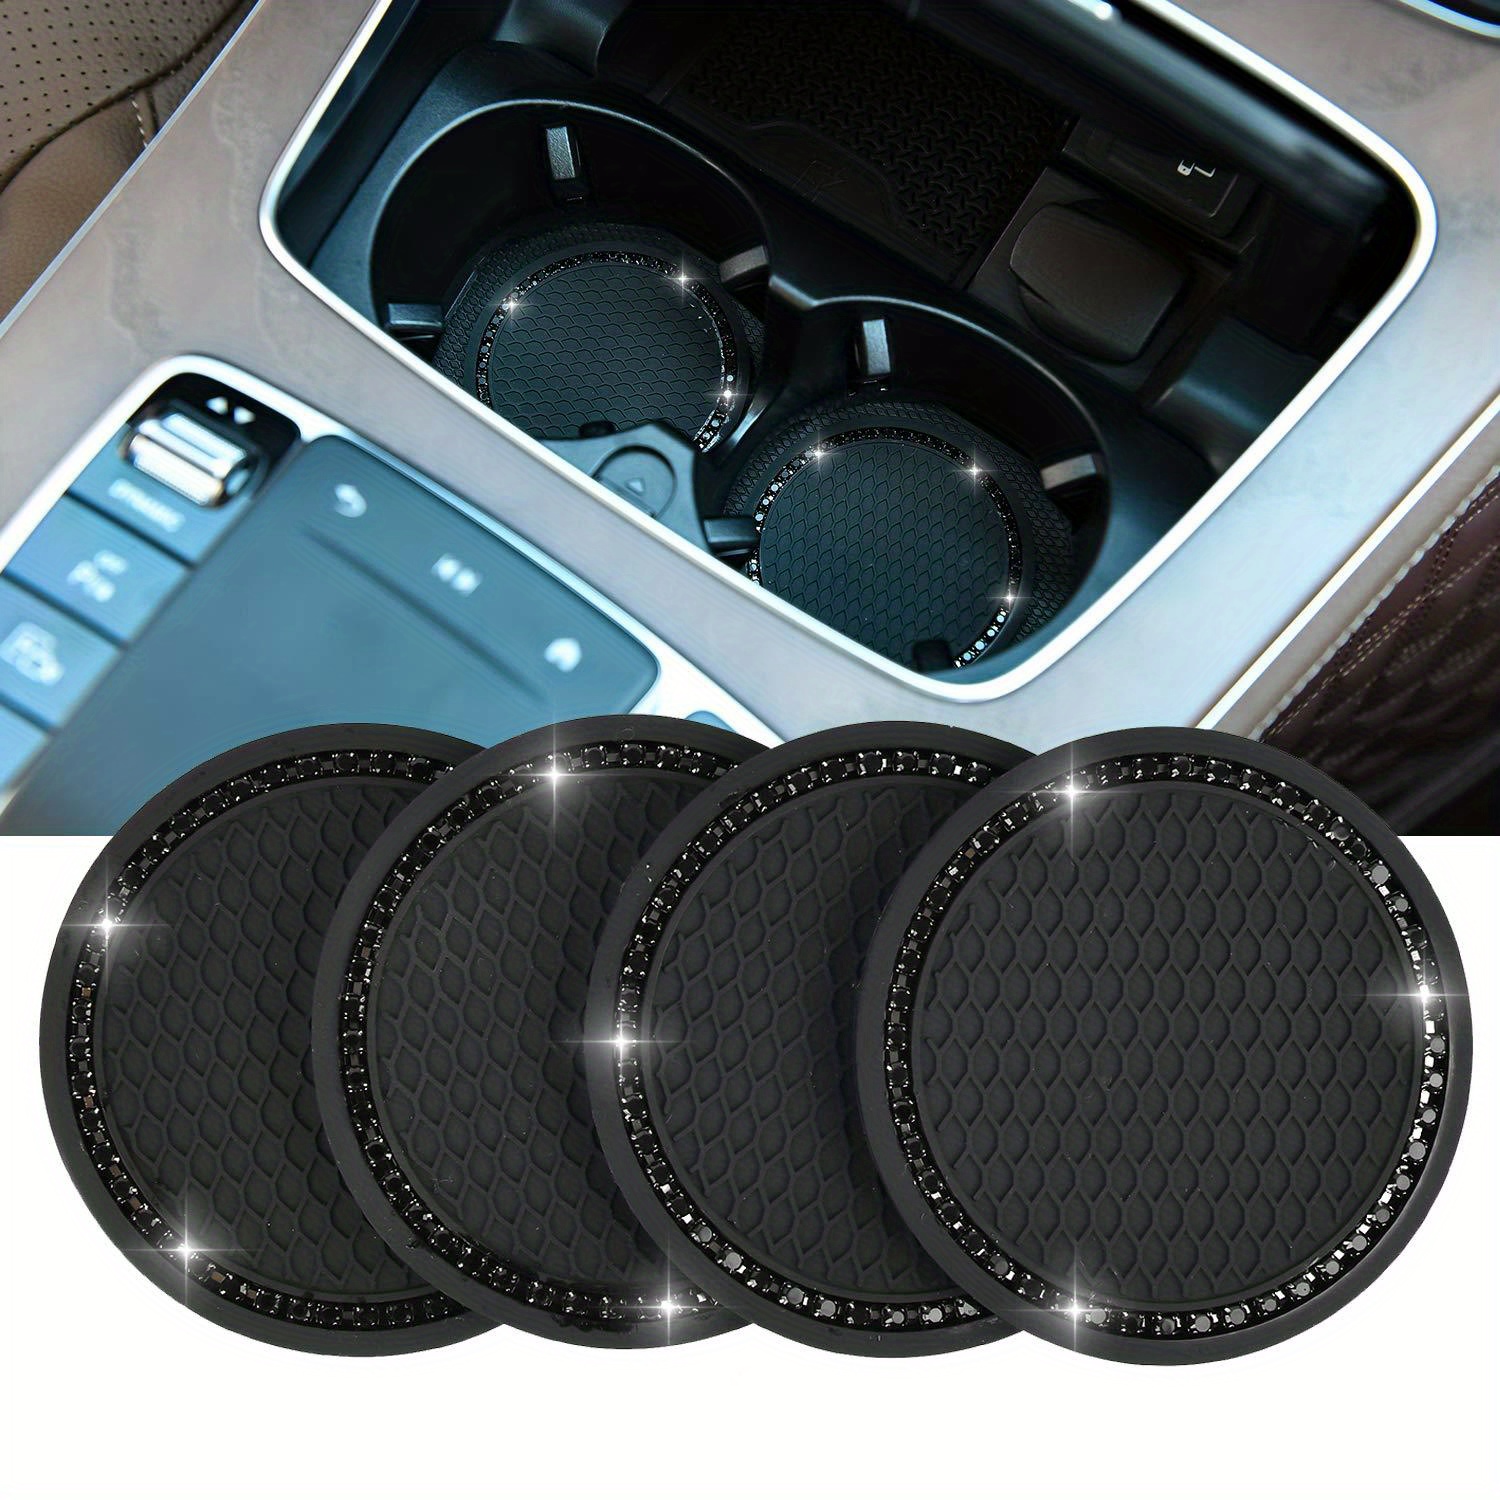 4 Pcs Bling Car Cup Holder Coaster, 2.75 inch Anti Slip Silicone